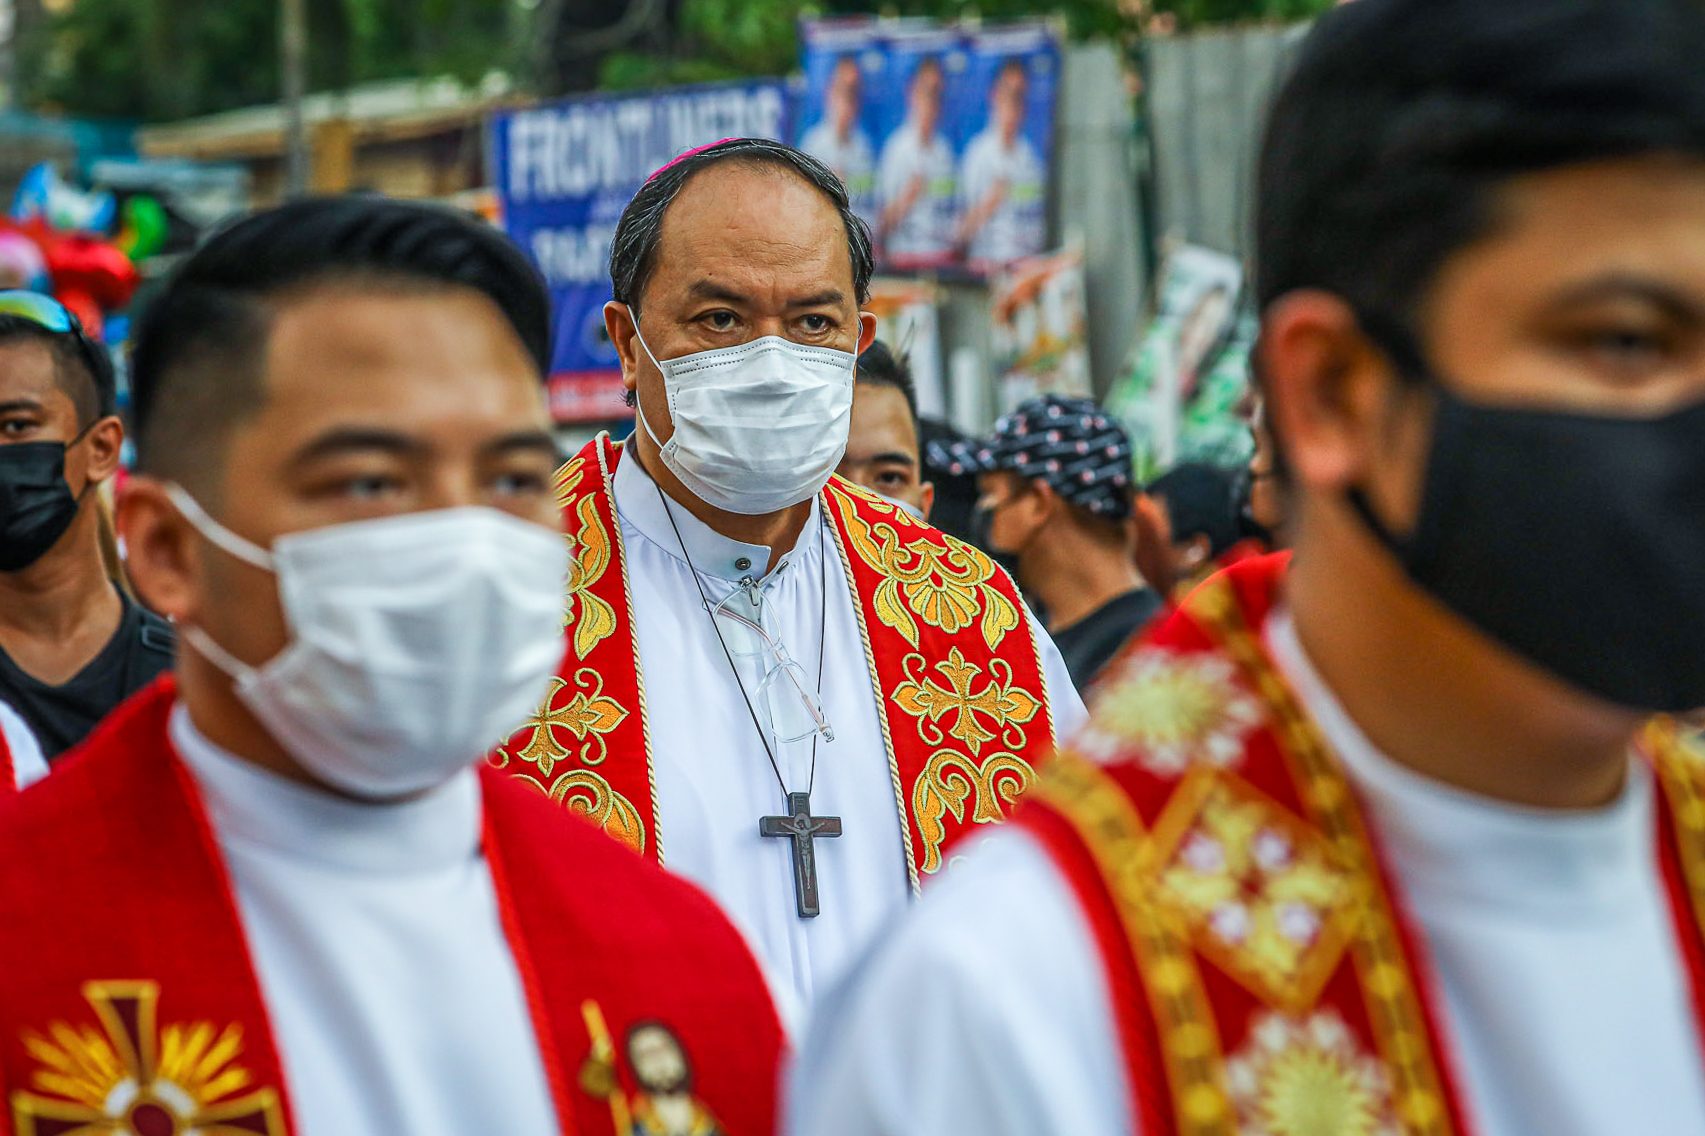 Neglecting EJK victims is also blasphemy, says CBCP president